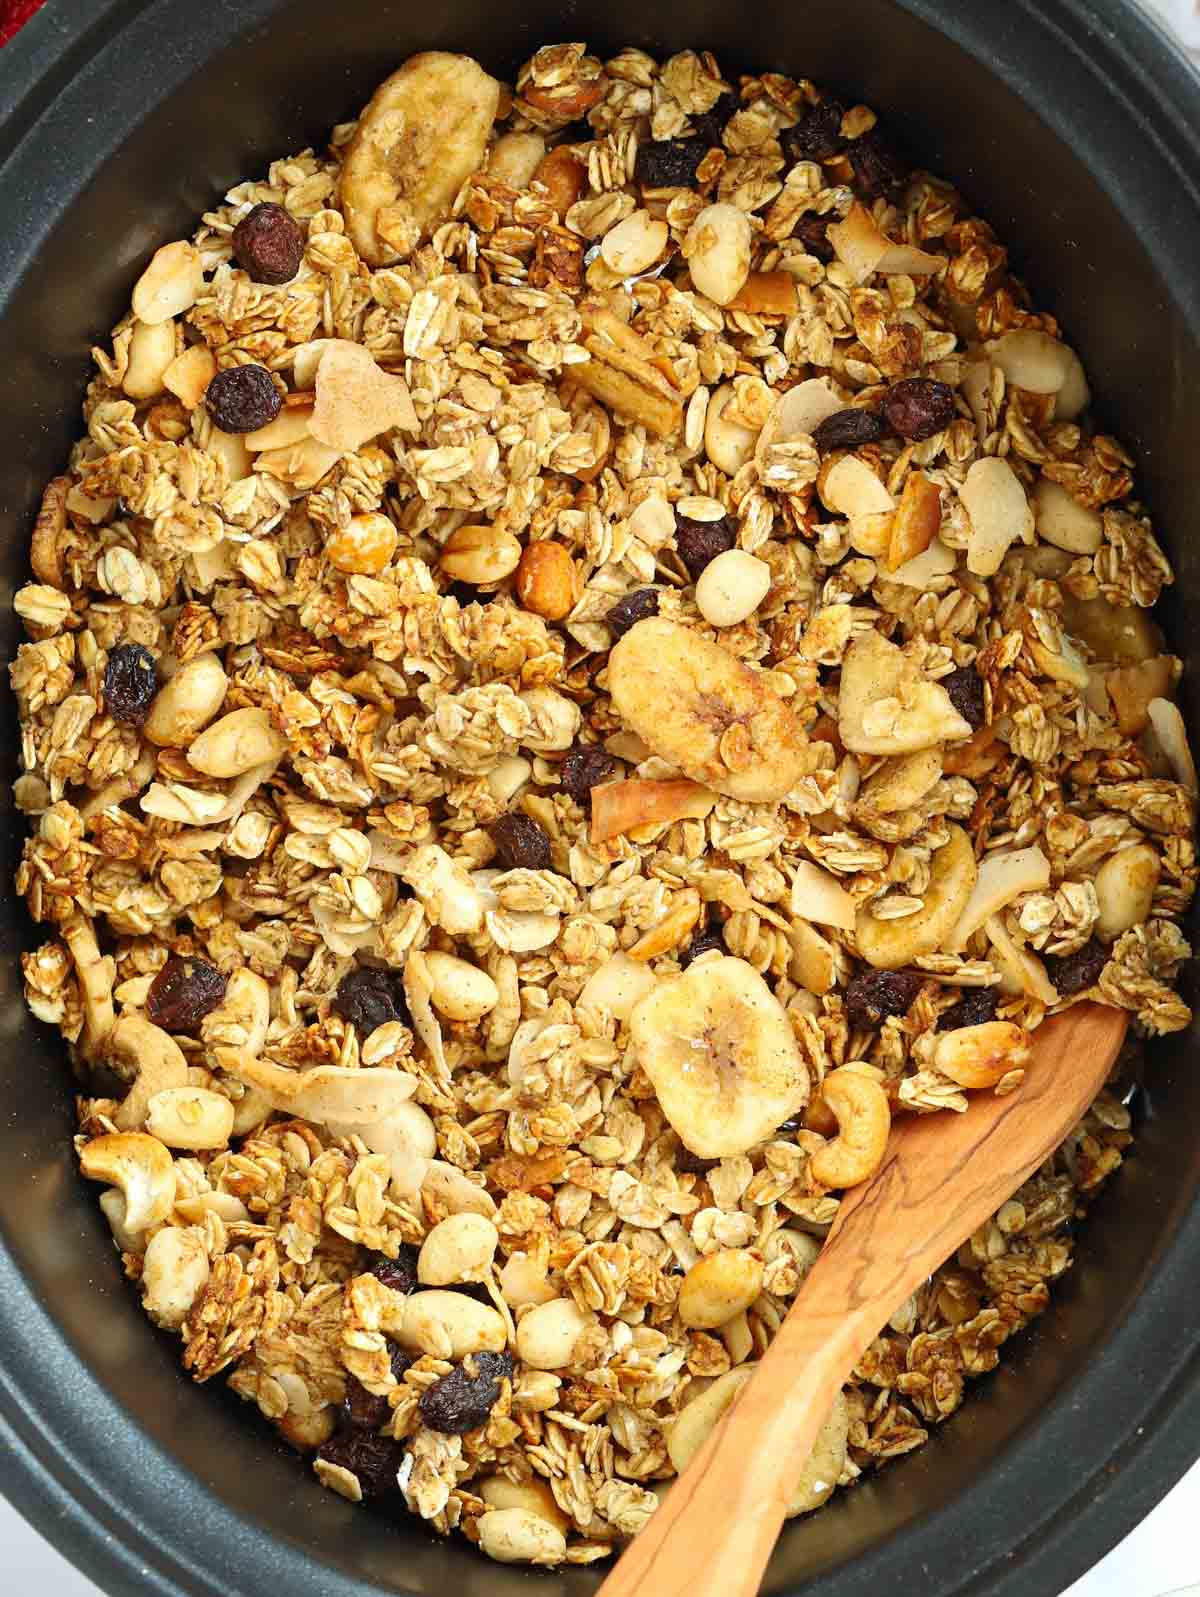 Healthy granola recipe made in the slow cooker.